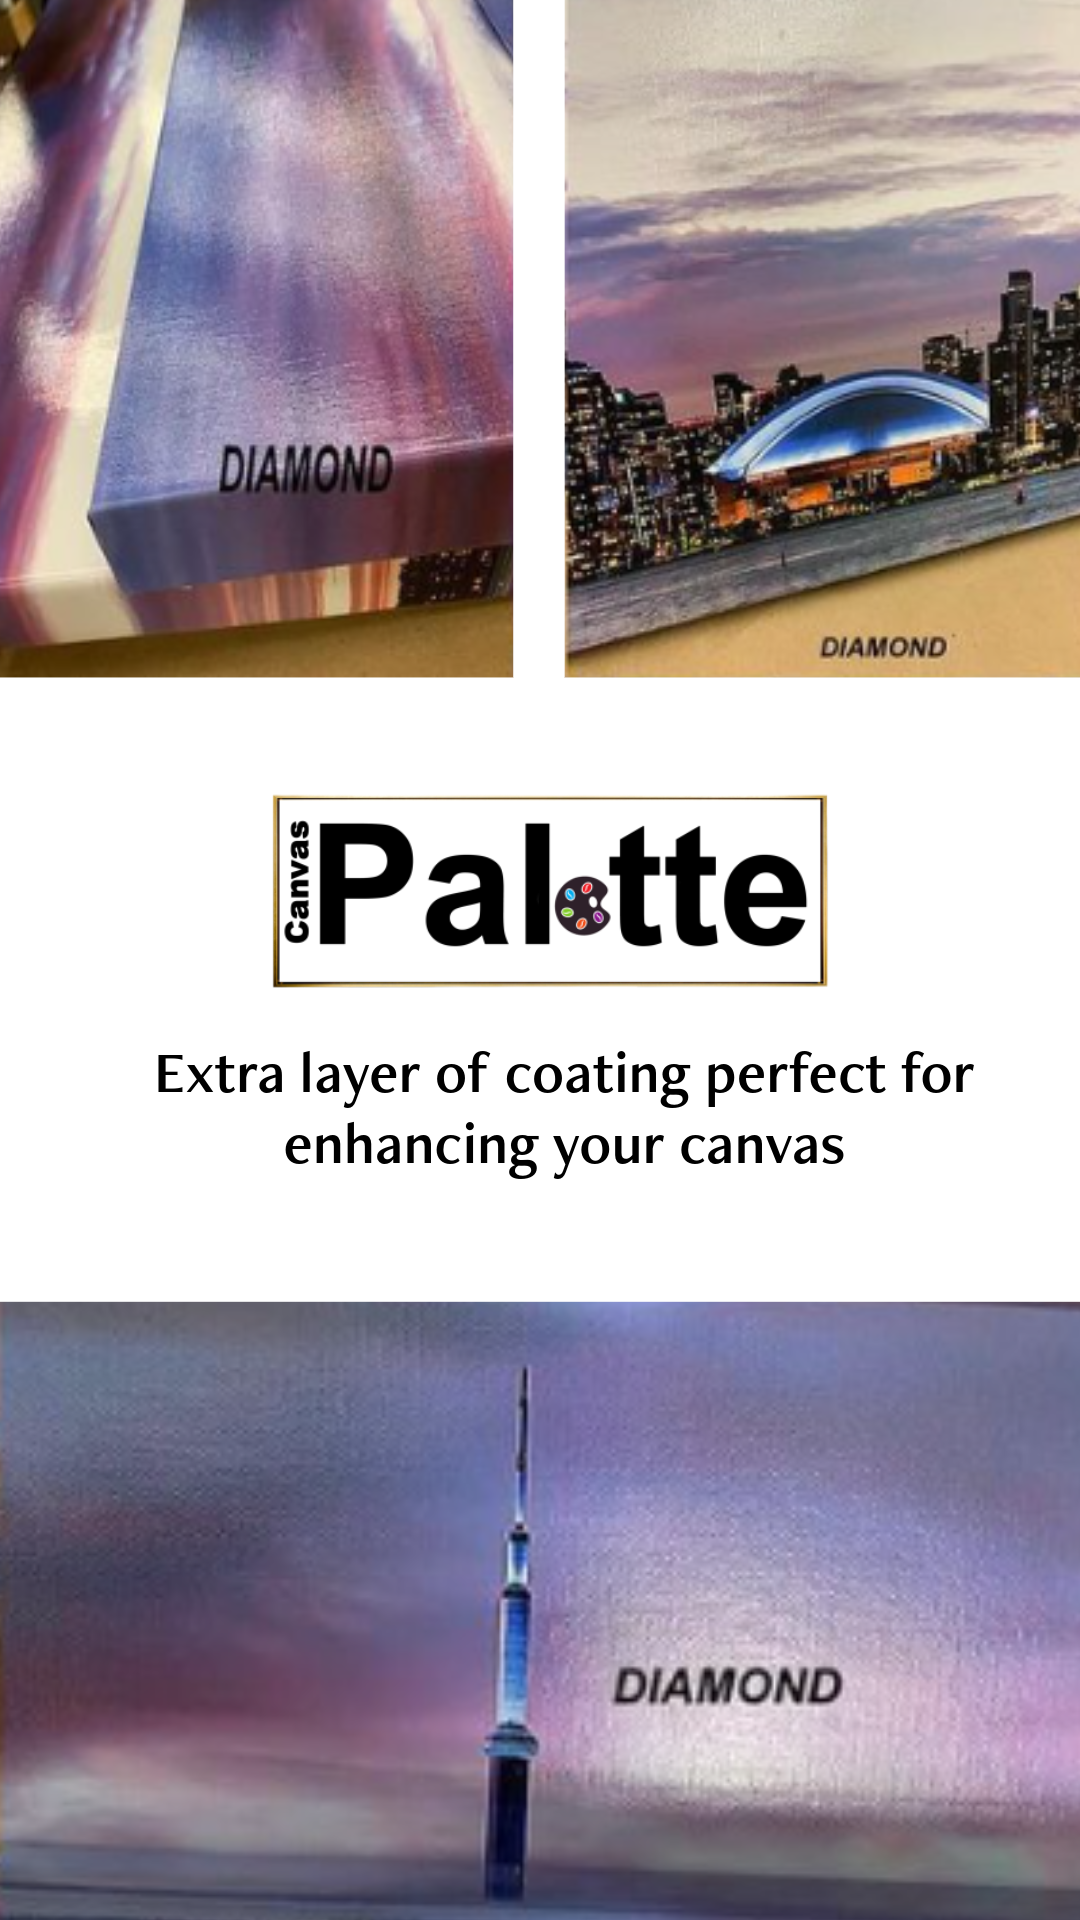 Diamond coating samples for canvas only at CanvasPallet.com in large sizes